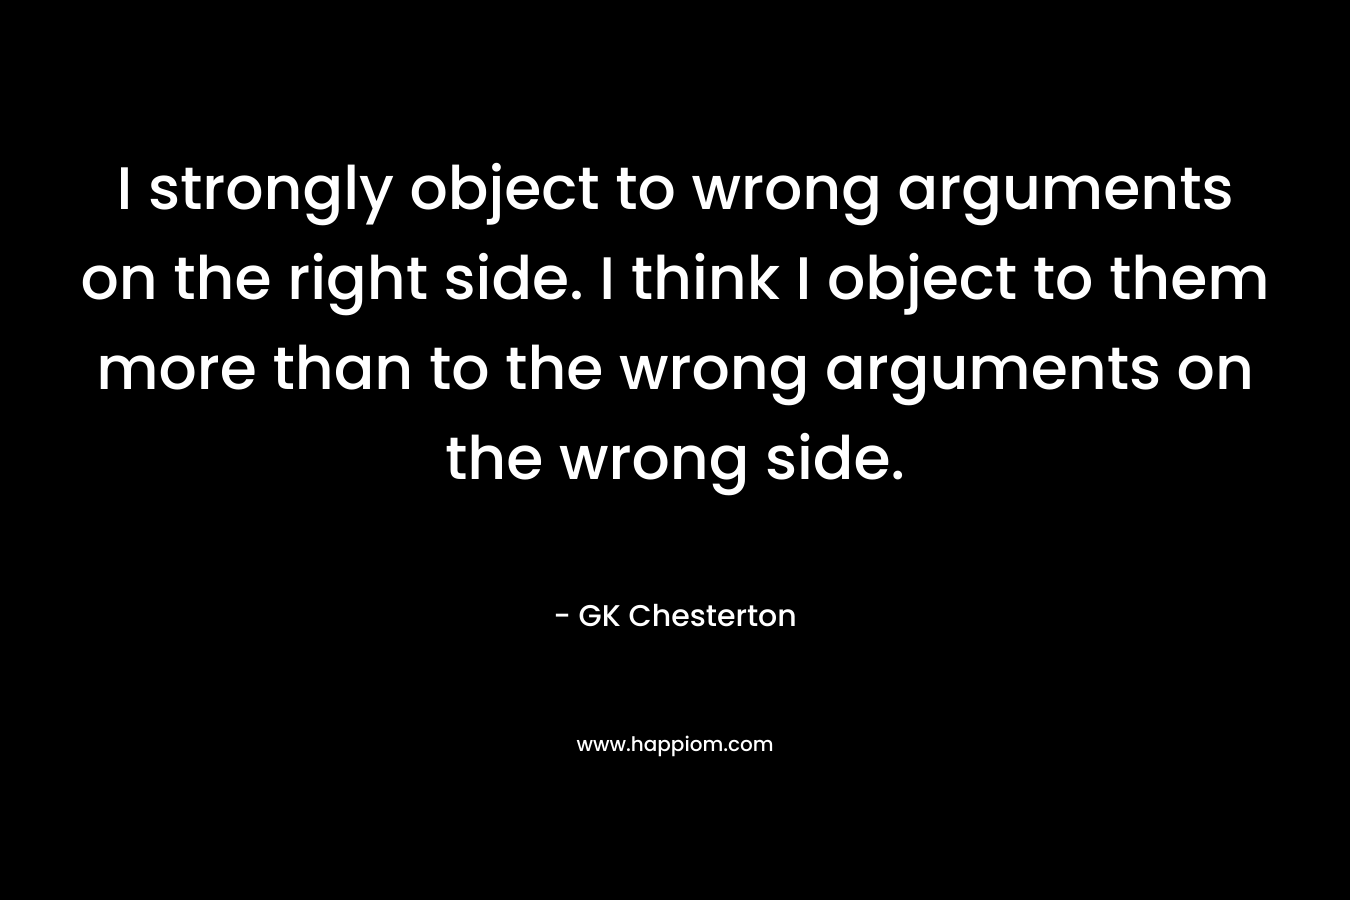 I strongly object to wrong arguments on the right side. I think I object to them more than to the wrong arguments on the wrong side.